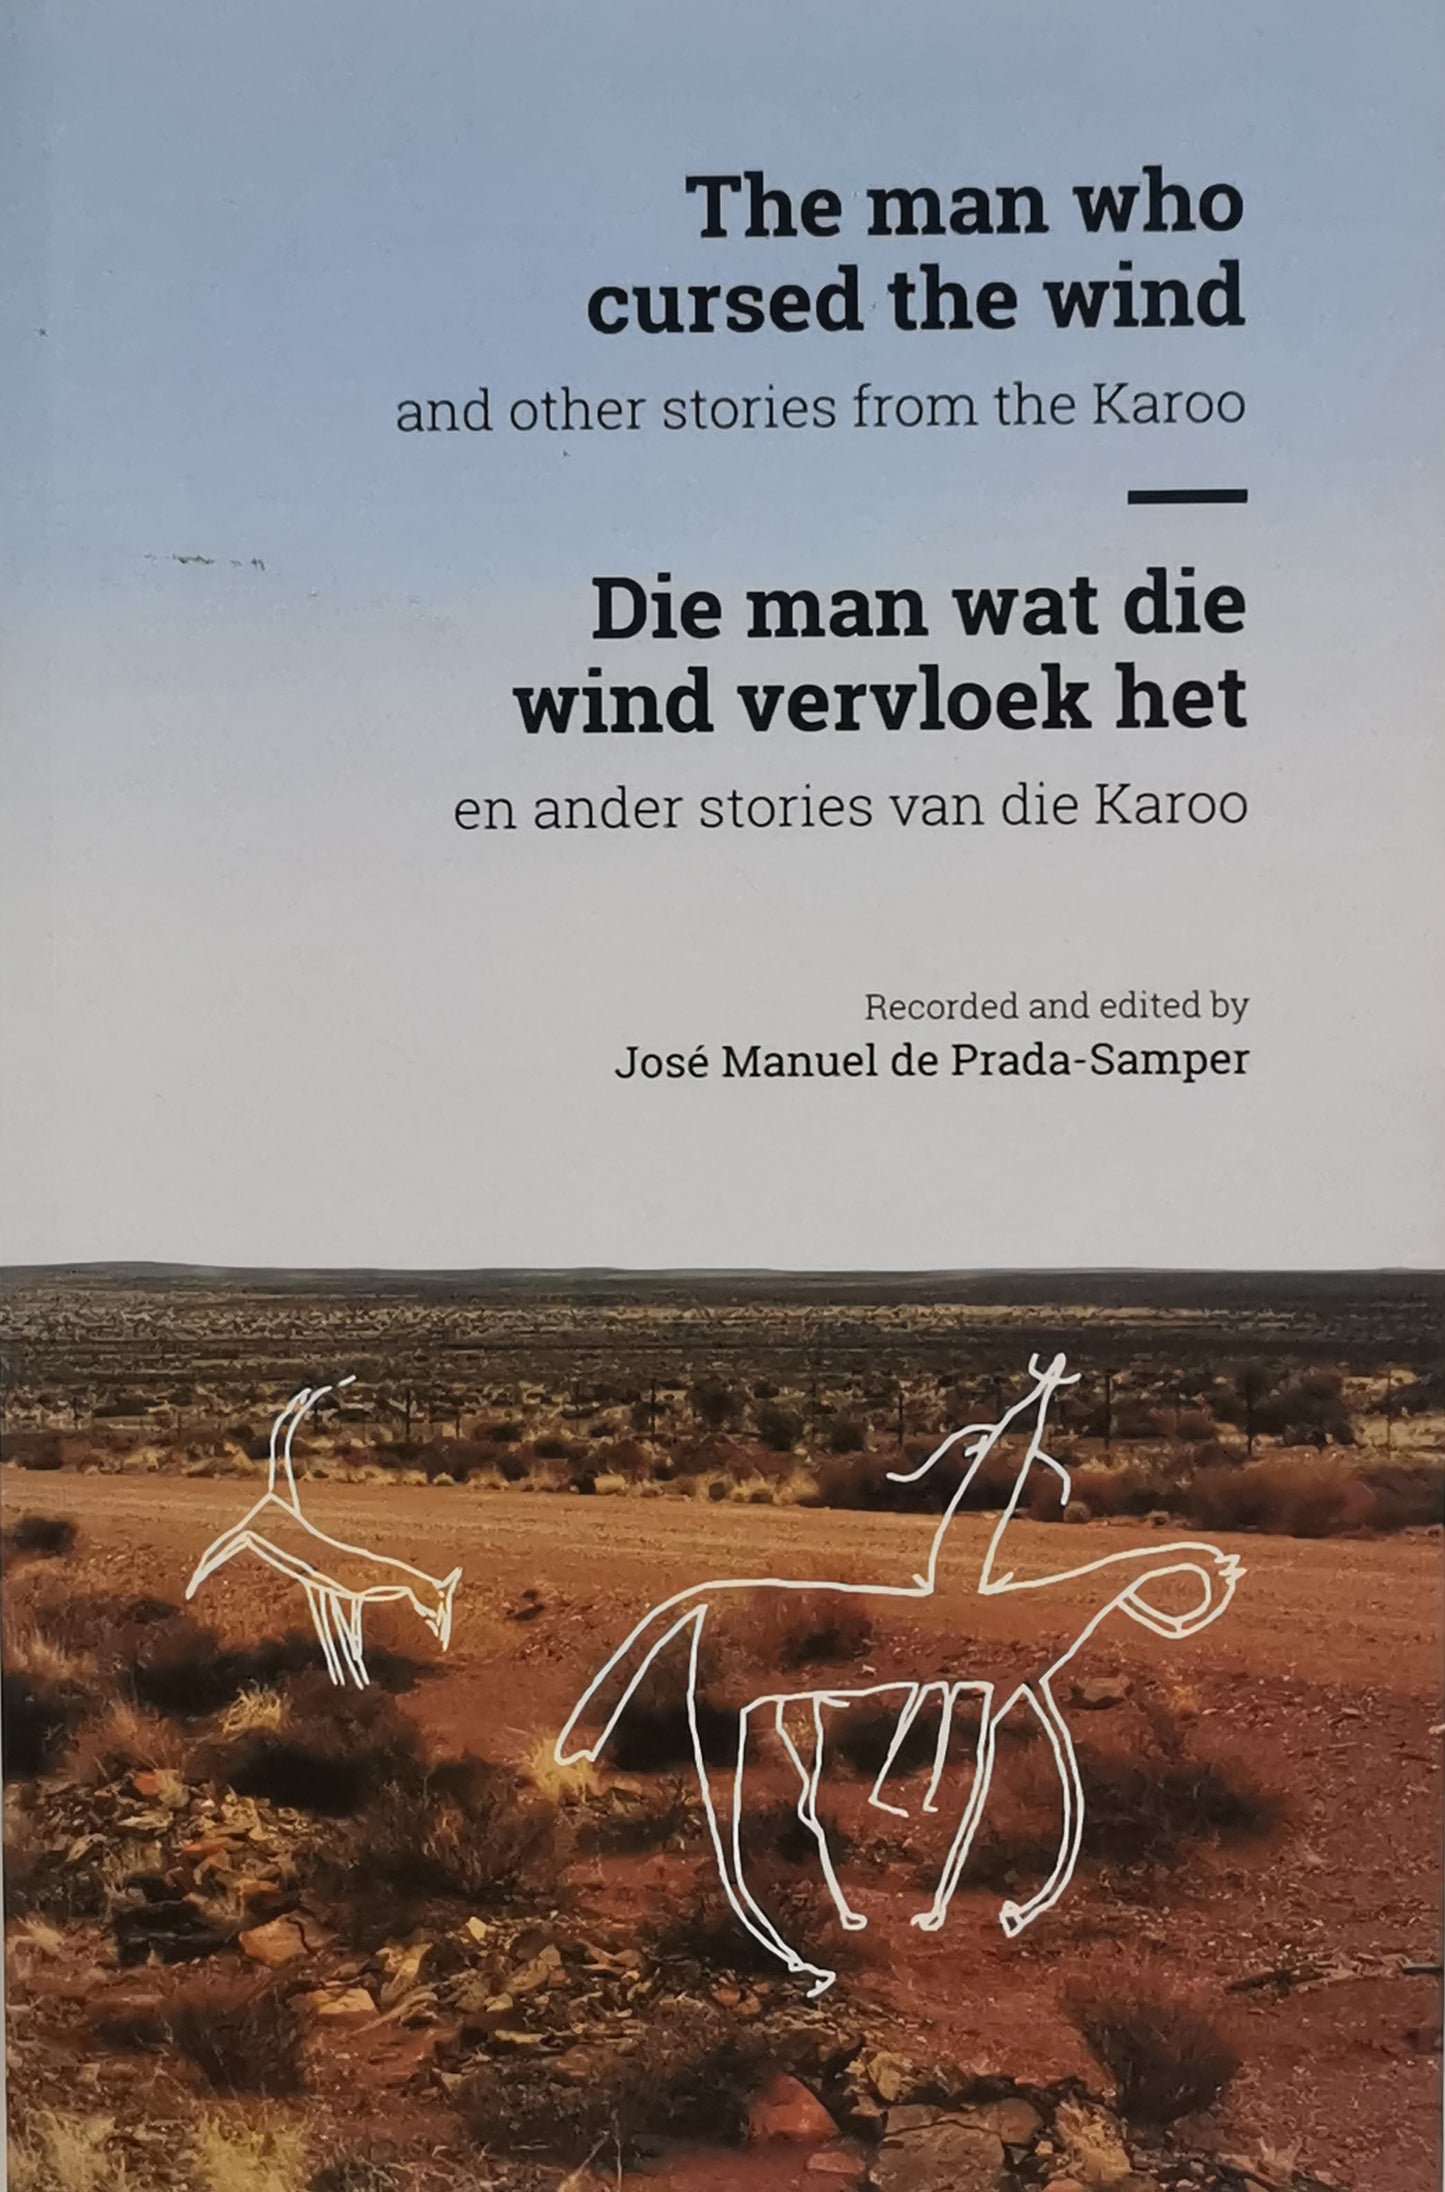 Manuel de Prada-Samper, José - THE MAN WHO CURSED THE WIND: AND OTHER STORIES FROM THE KAROO